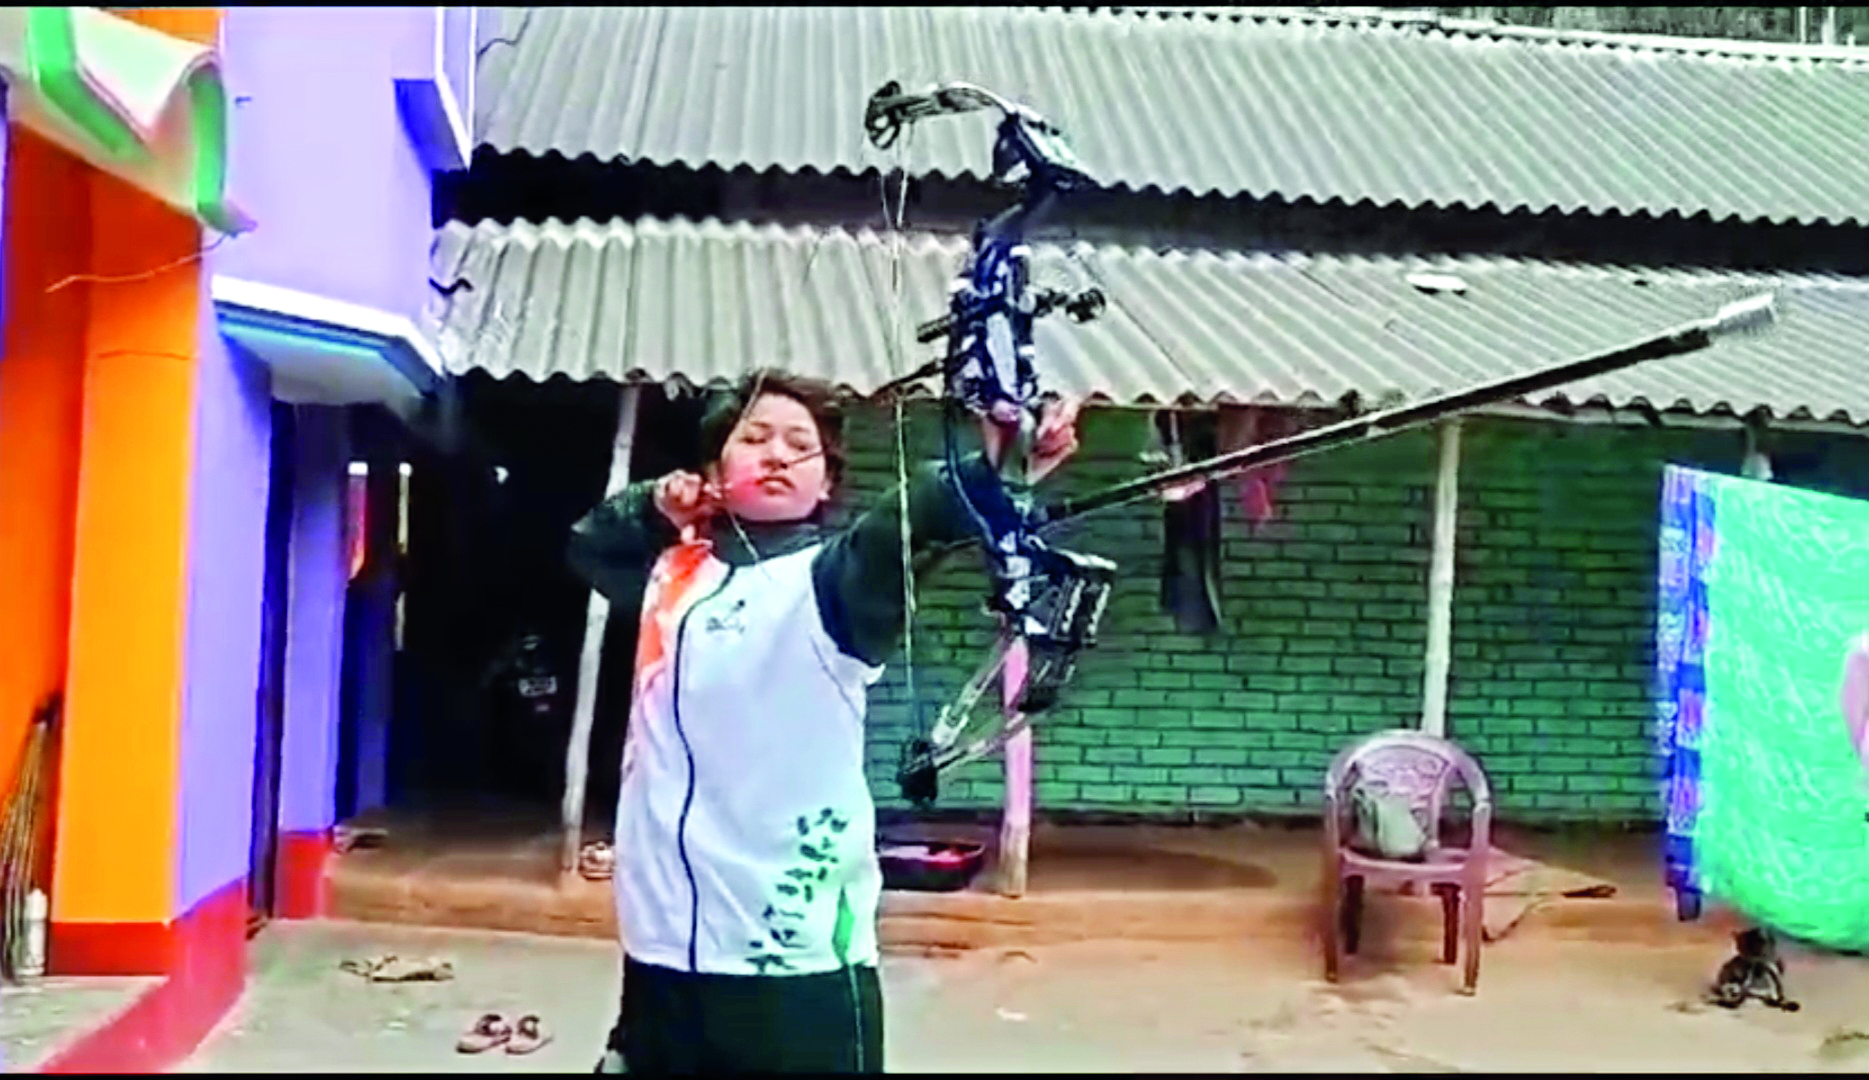 Malda girl clinches gold in All India Police Archery Competition